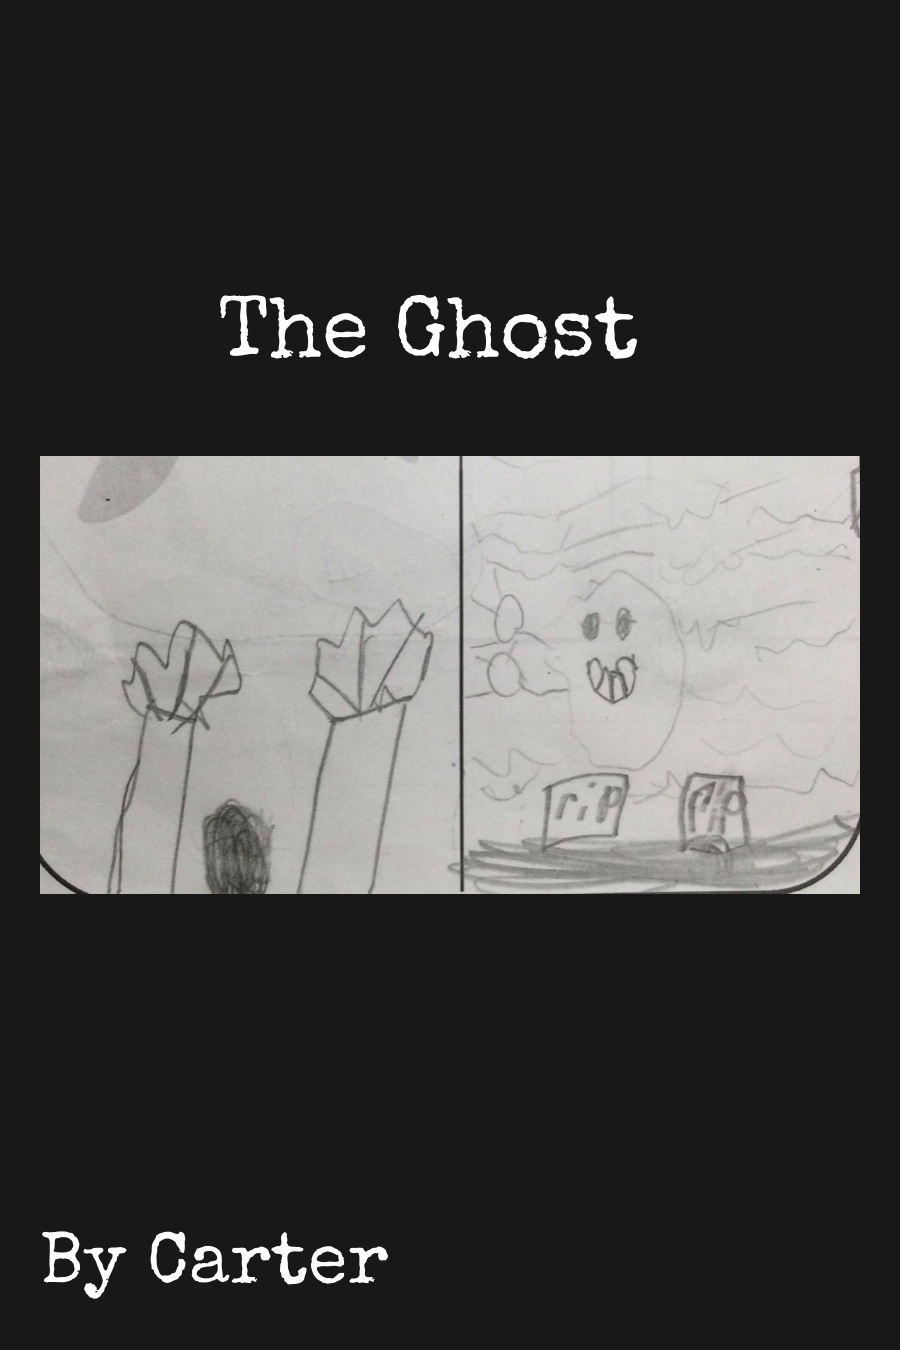 The Ghost by Carter H